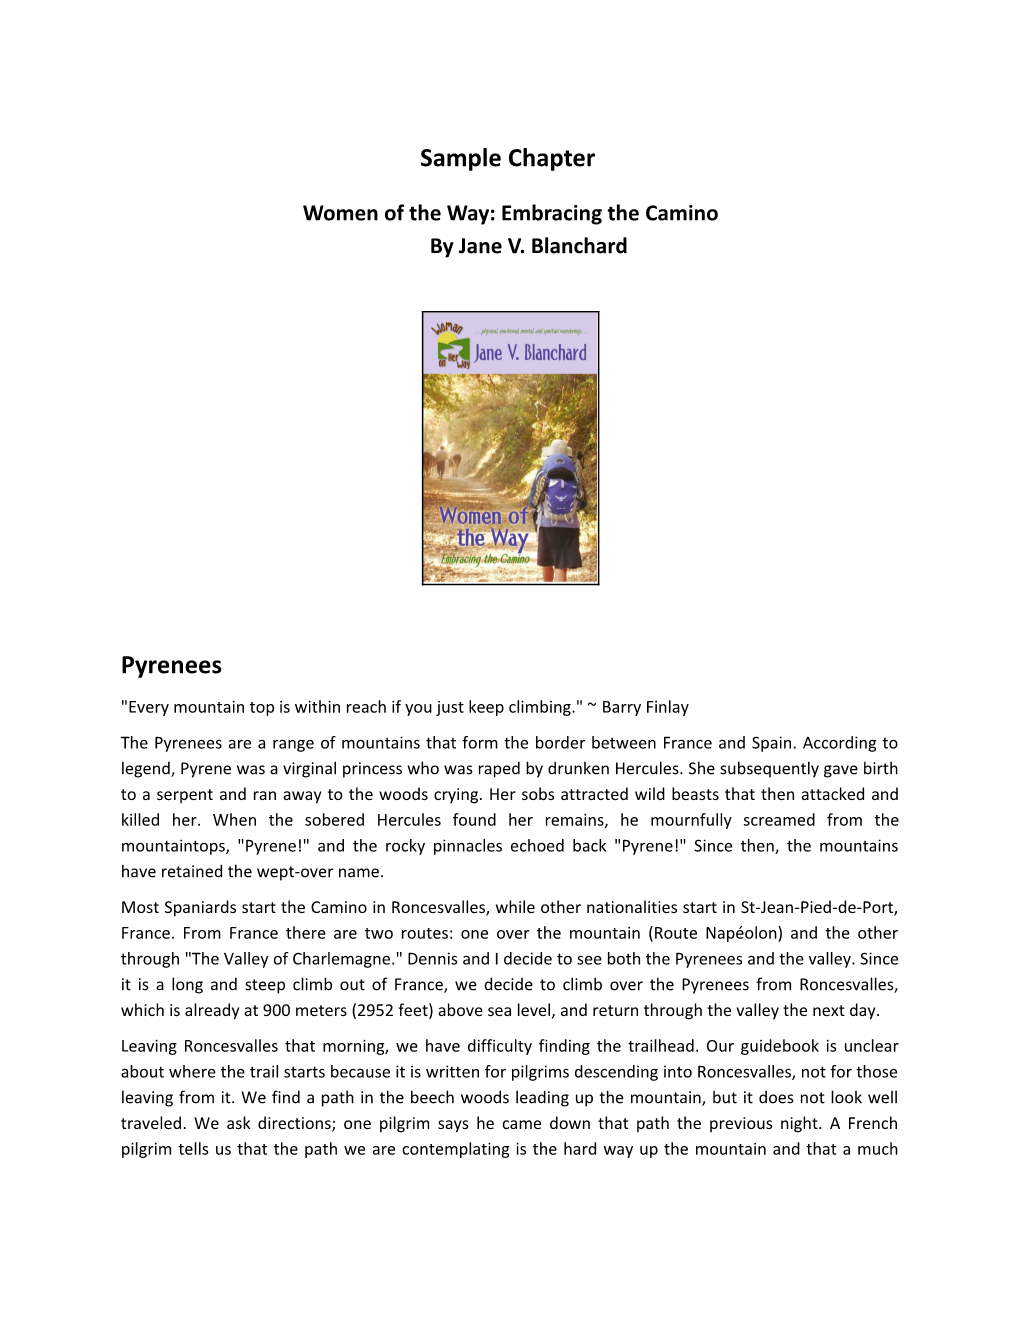 Sample Chapter Pyrenees